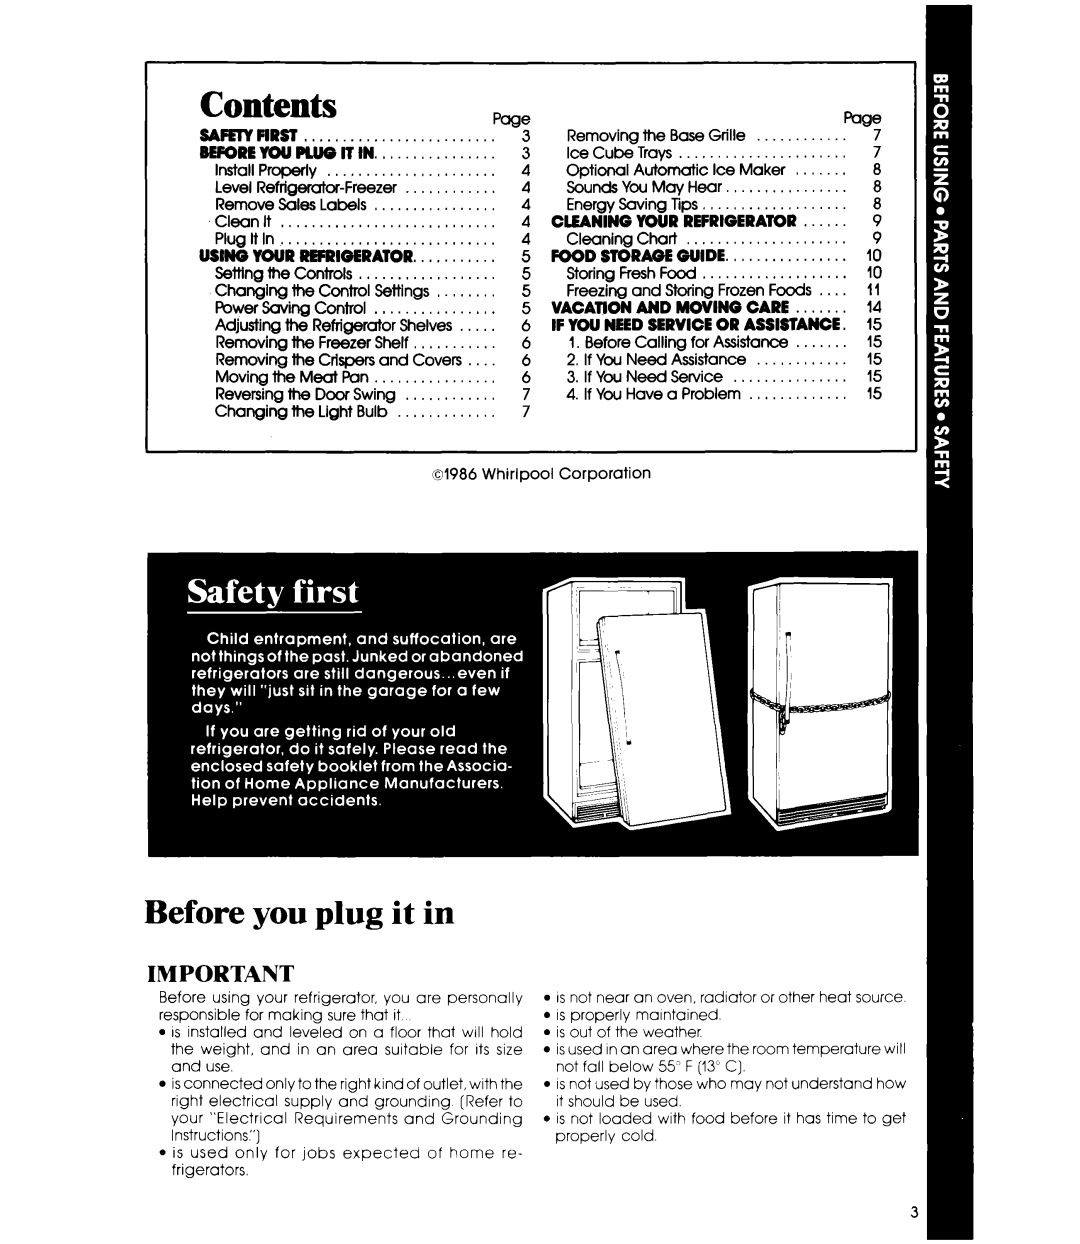 Whirlpool ETl7HK manual Before you plug it in, Contents, Pase, Page 